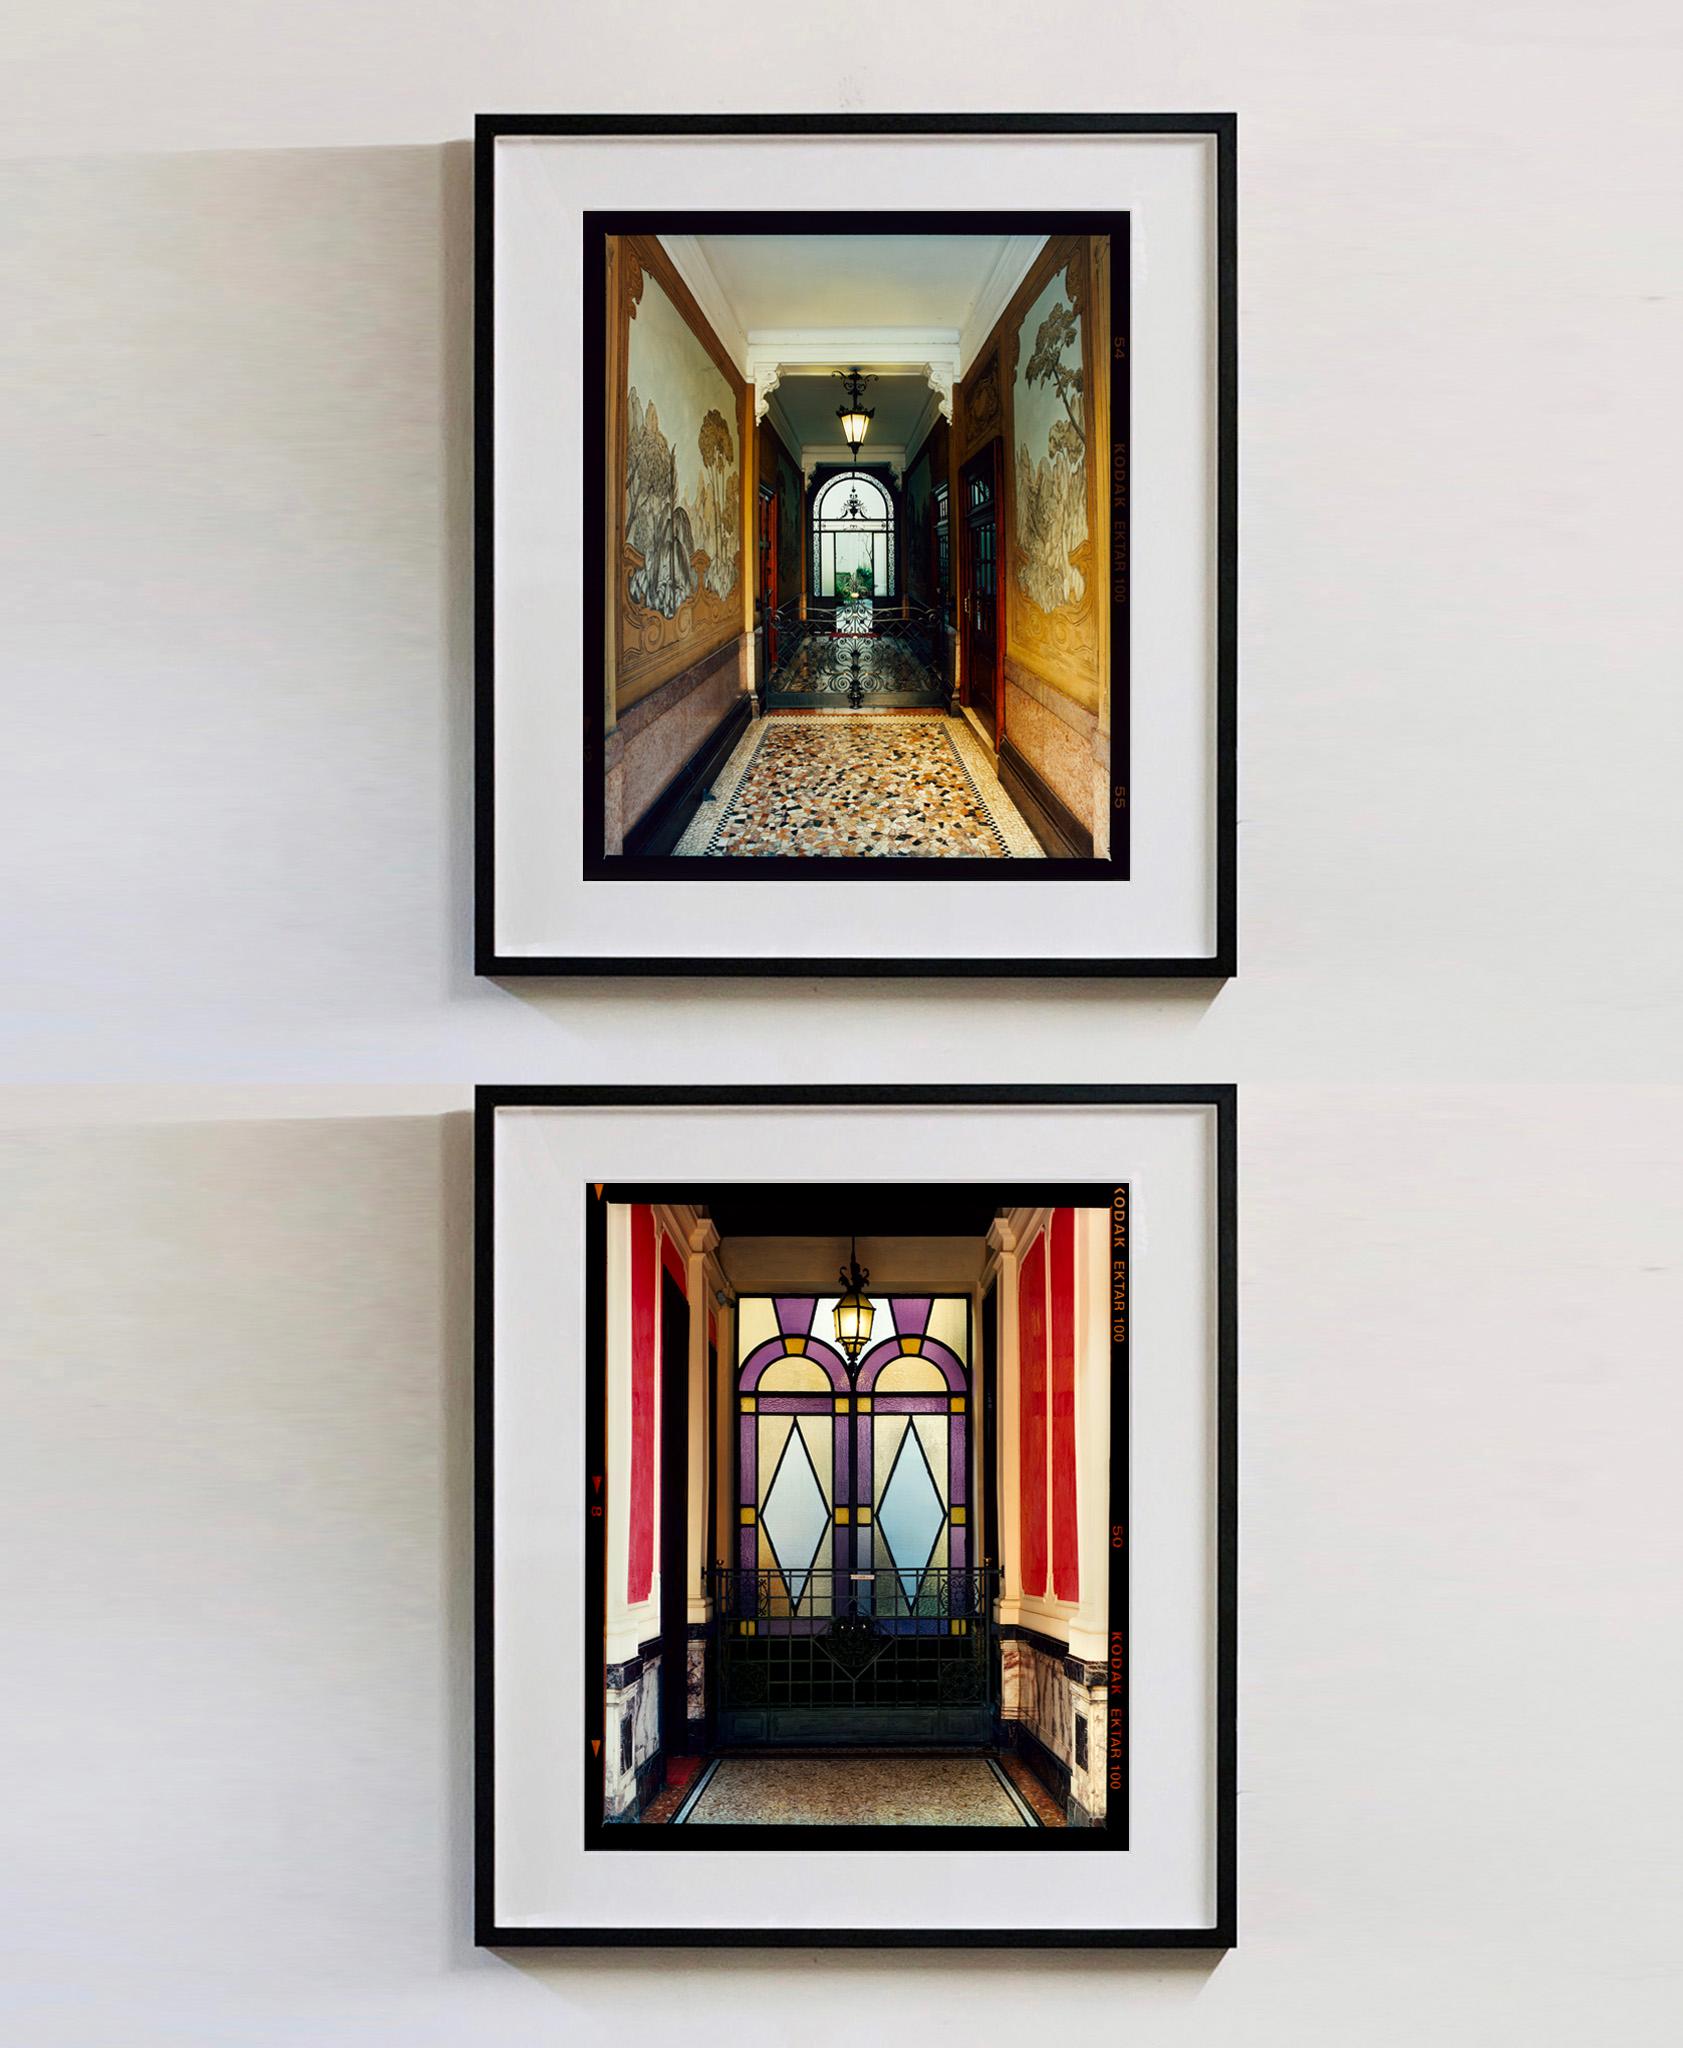 Foyer VII, from Richard Heeps series A Short History of Milan which began as a special project for the 2018 Affordable Art Fair Milan. It was well received and the artwork has become popular with art buyers around the world. Richard continues to add